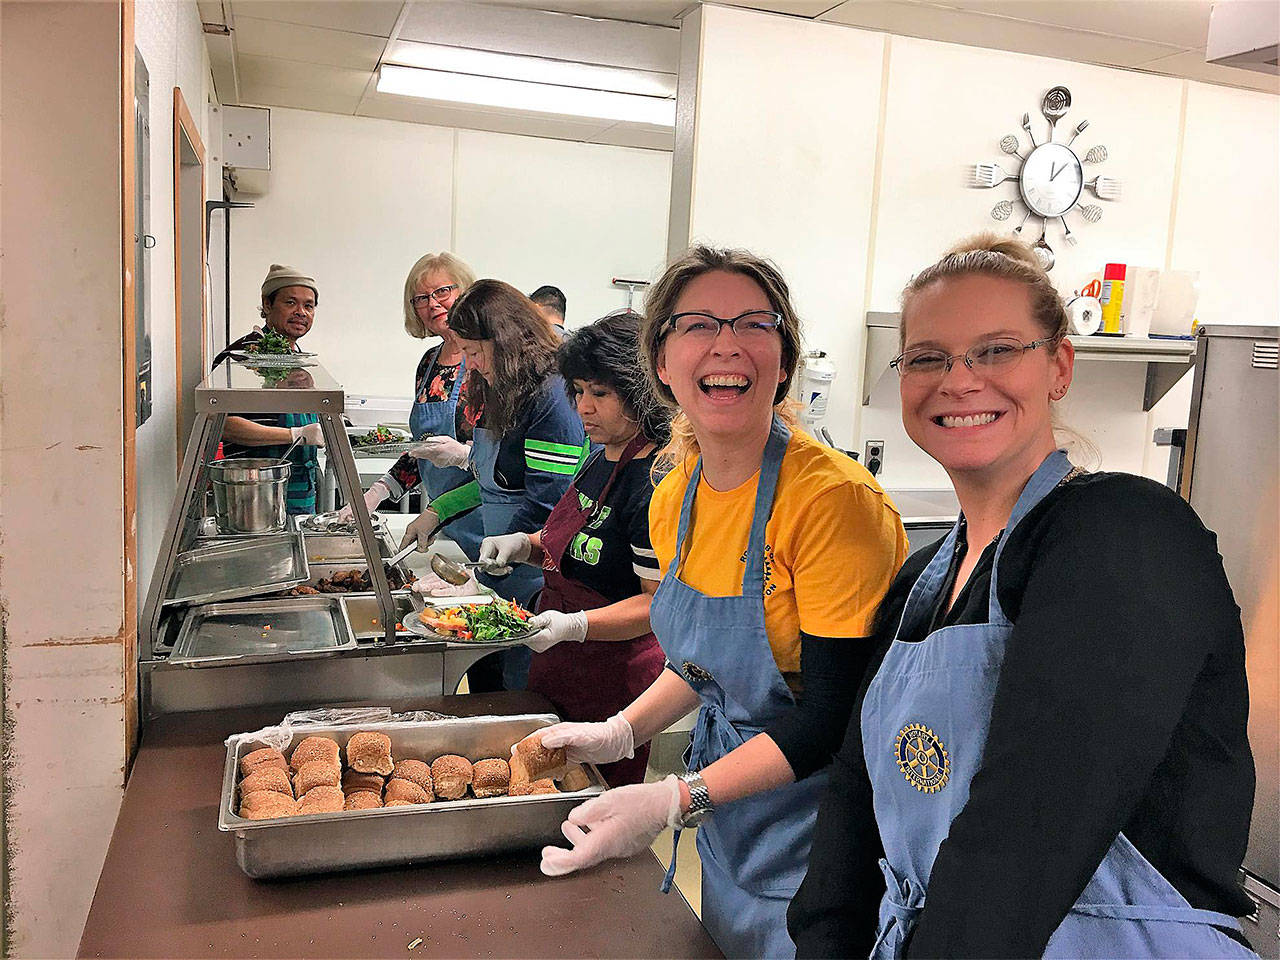 Arlington Rotary volunteers Jessica Martin (left) and Breanne Martin help prep meals in the kitchen at the Stillaguamish Senior Center on Dec. 15. (Contributed photo)